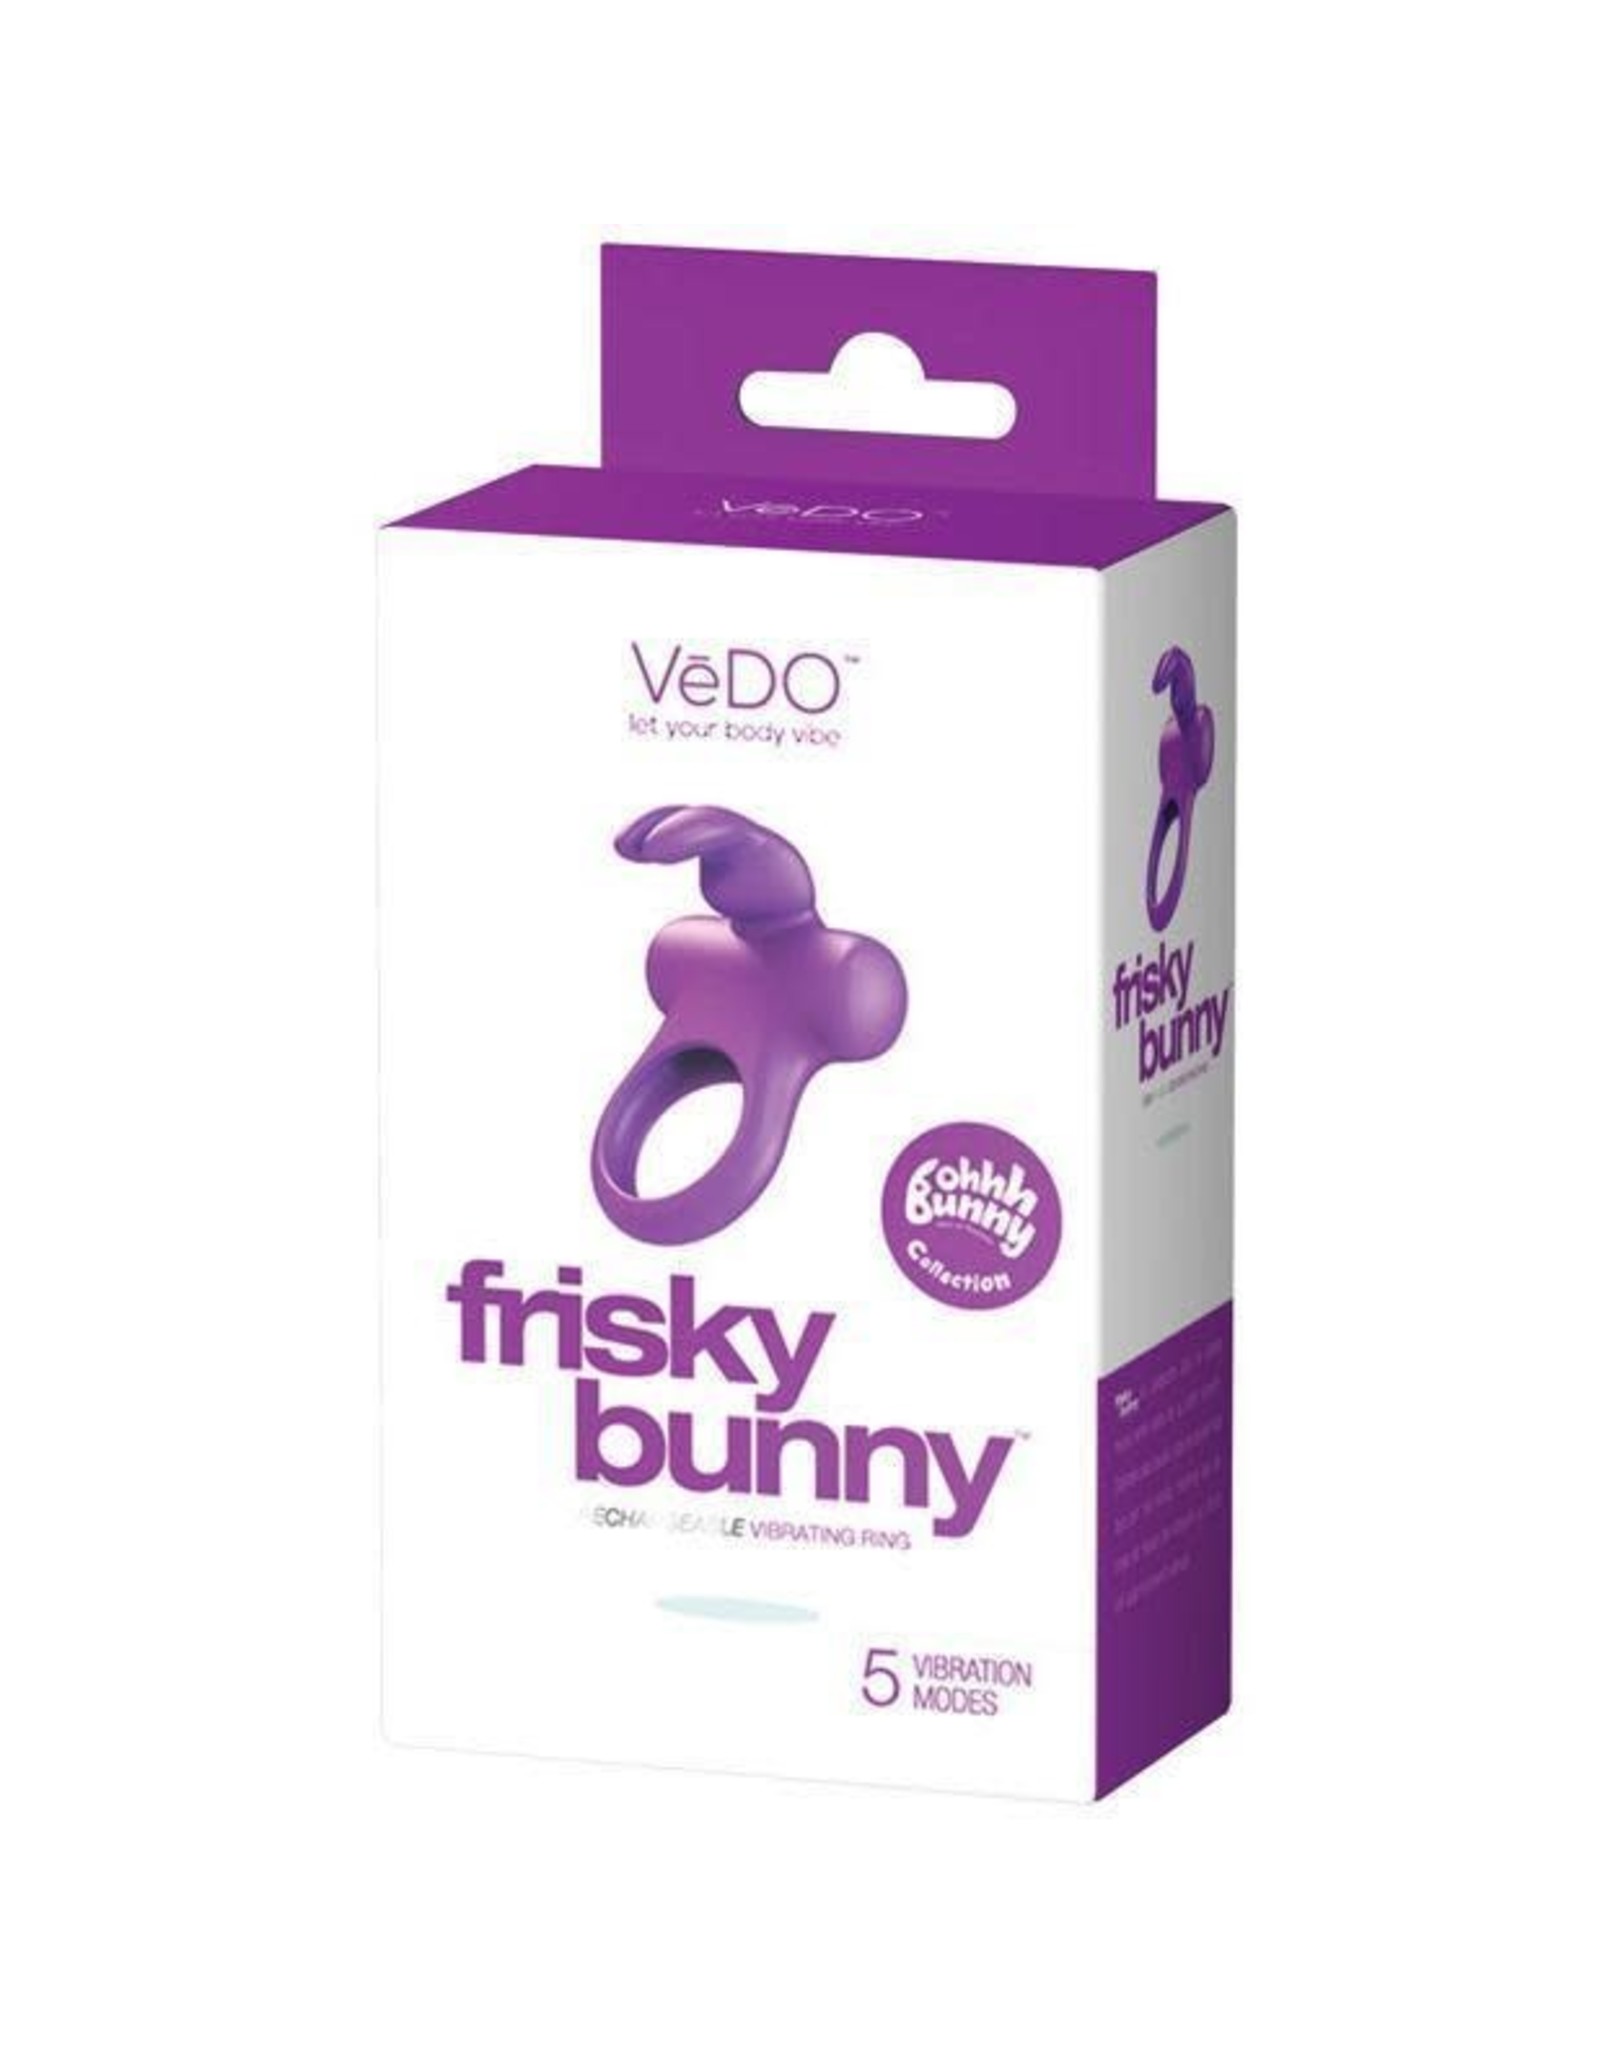 VEDO VEDO - FRISKY BUNNY RECHARGEABLE VIBRATING RING - PERFECTLY PURPLE